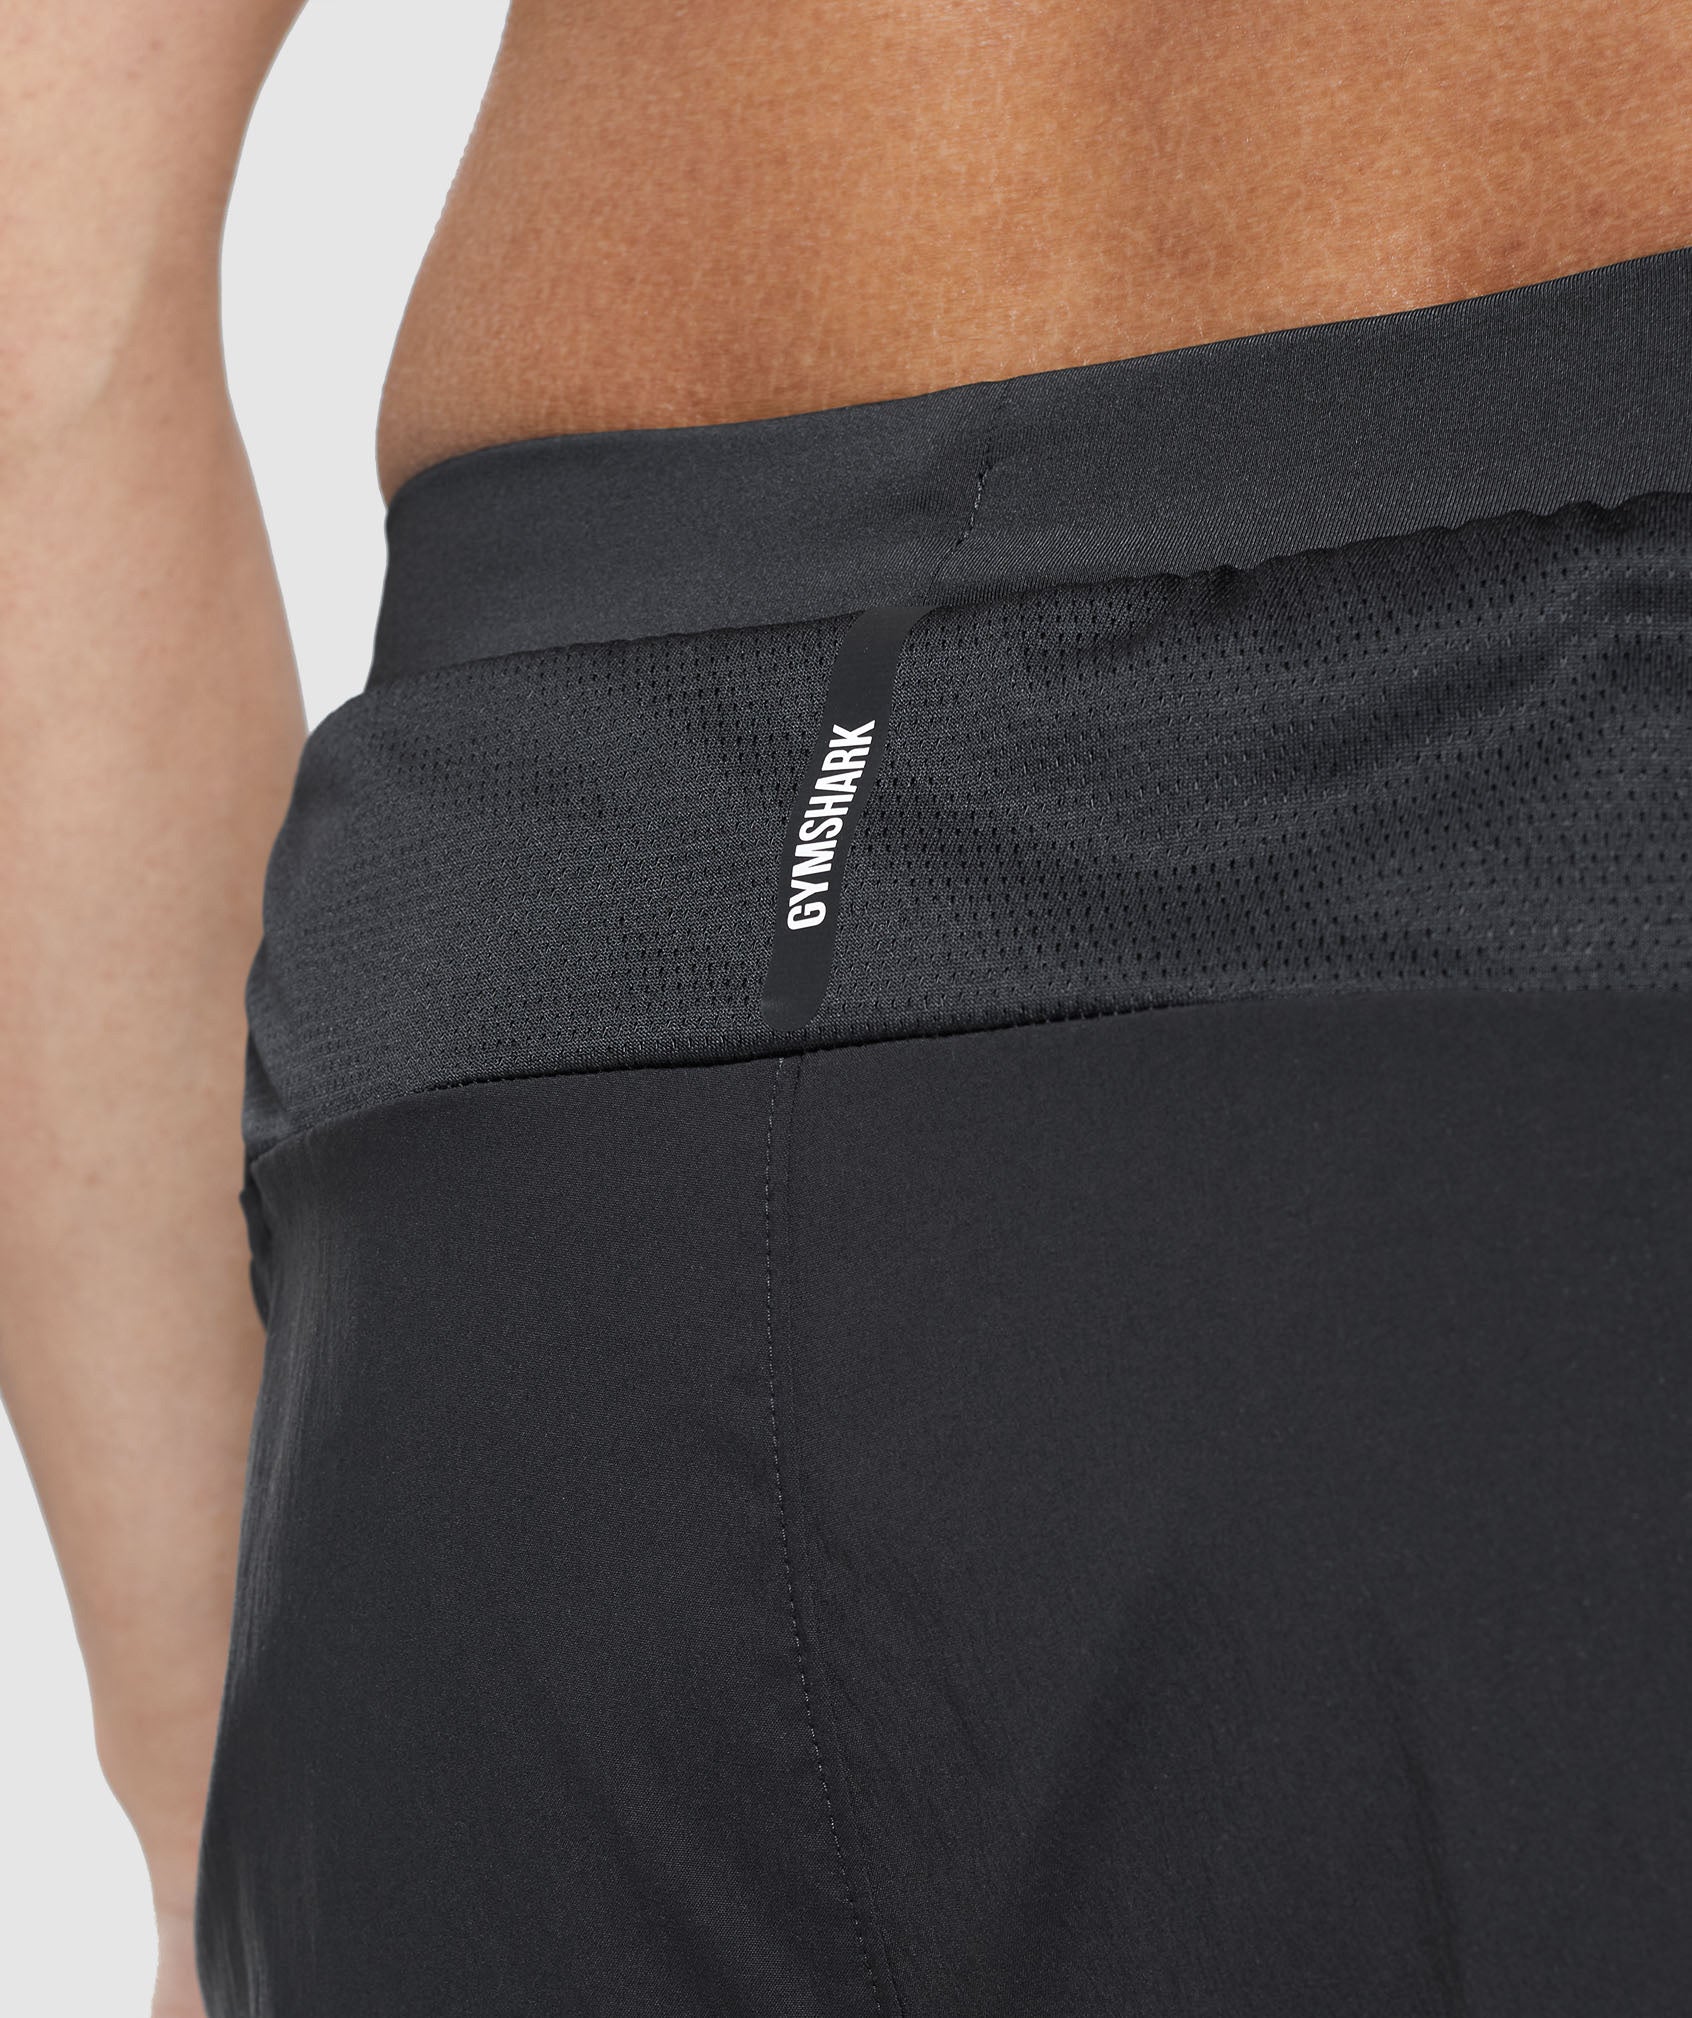 Speed Evolve 3" 2 In 1 Shorts in Black - view 5